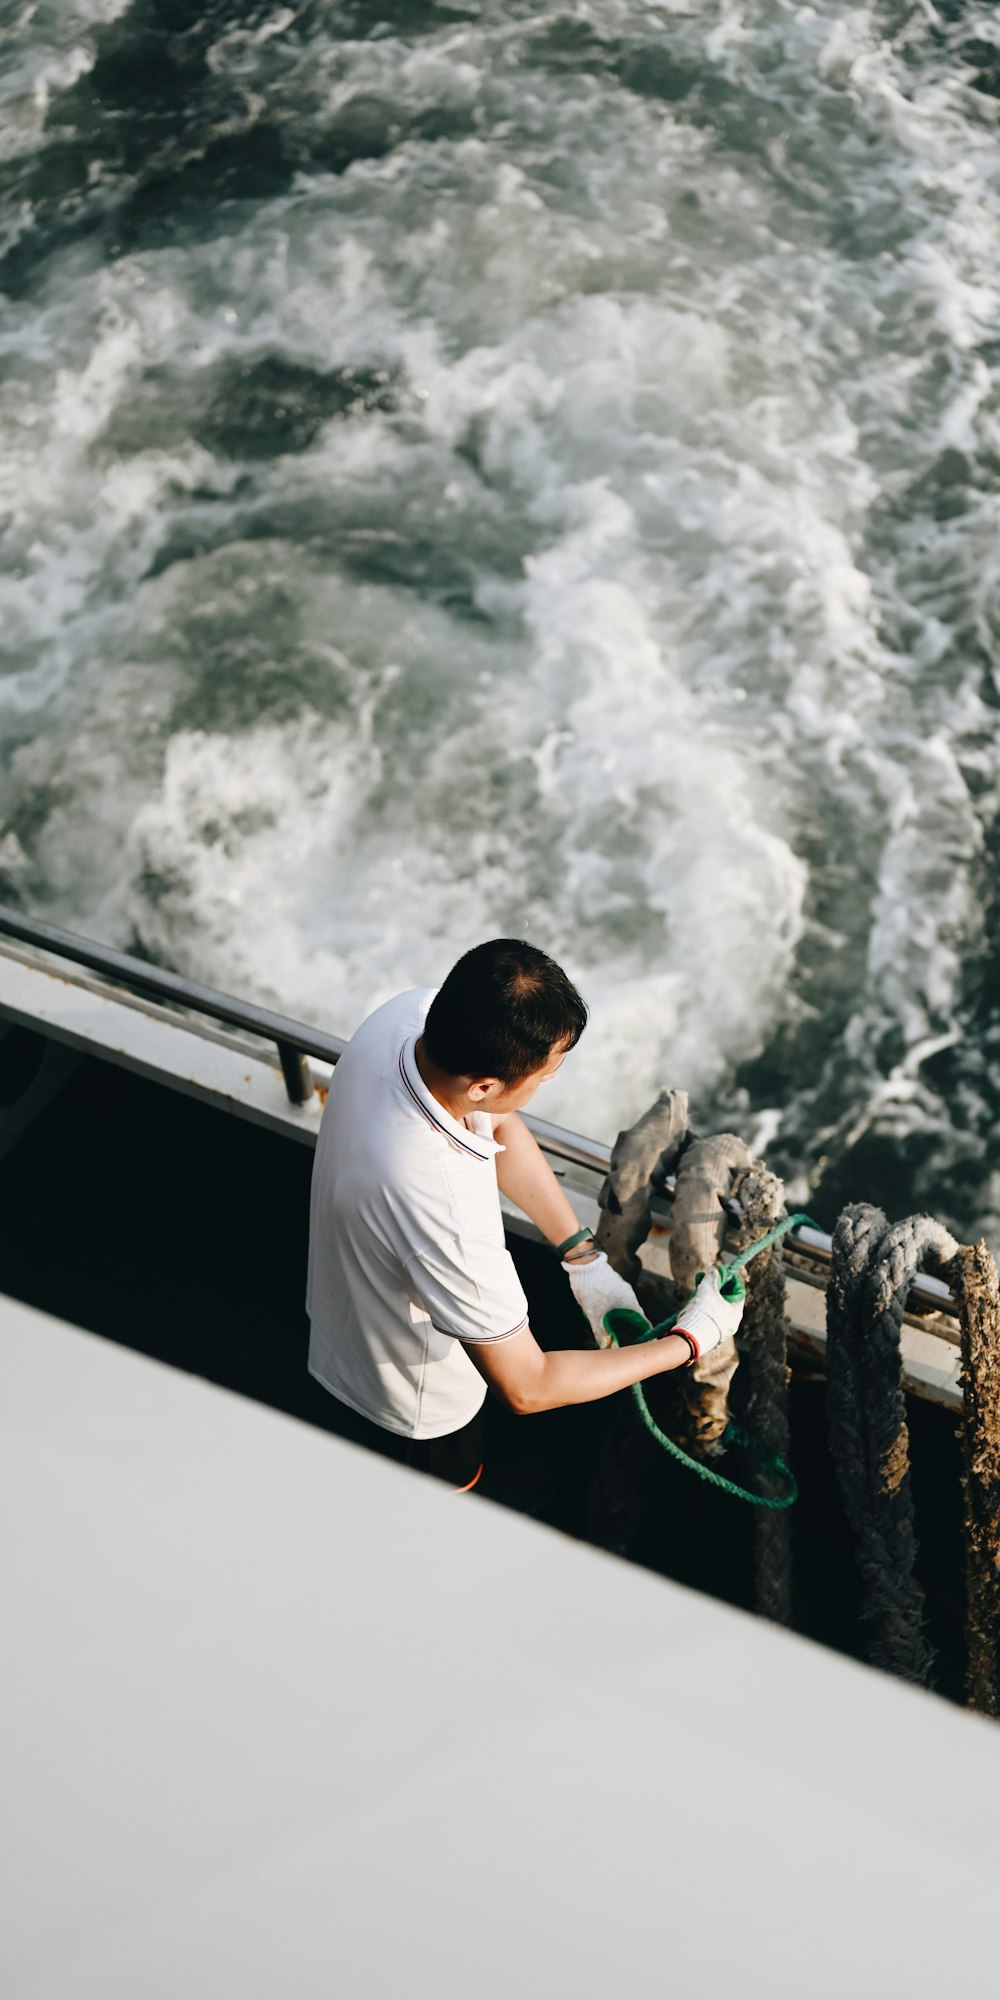 a man is washing his hands on the railing of a boat